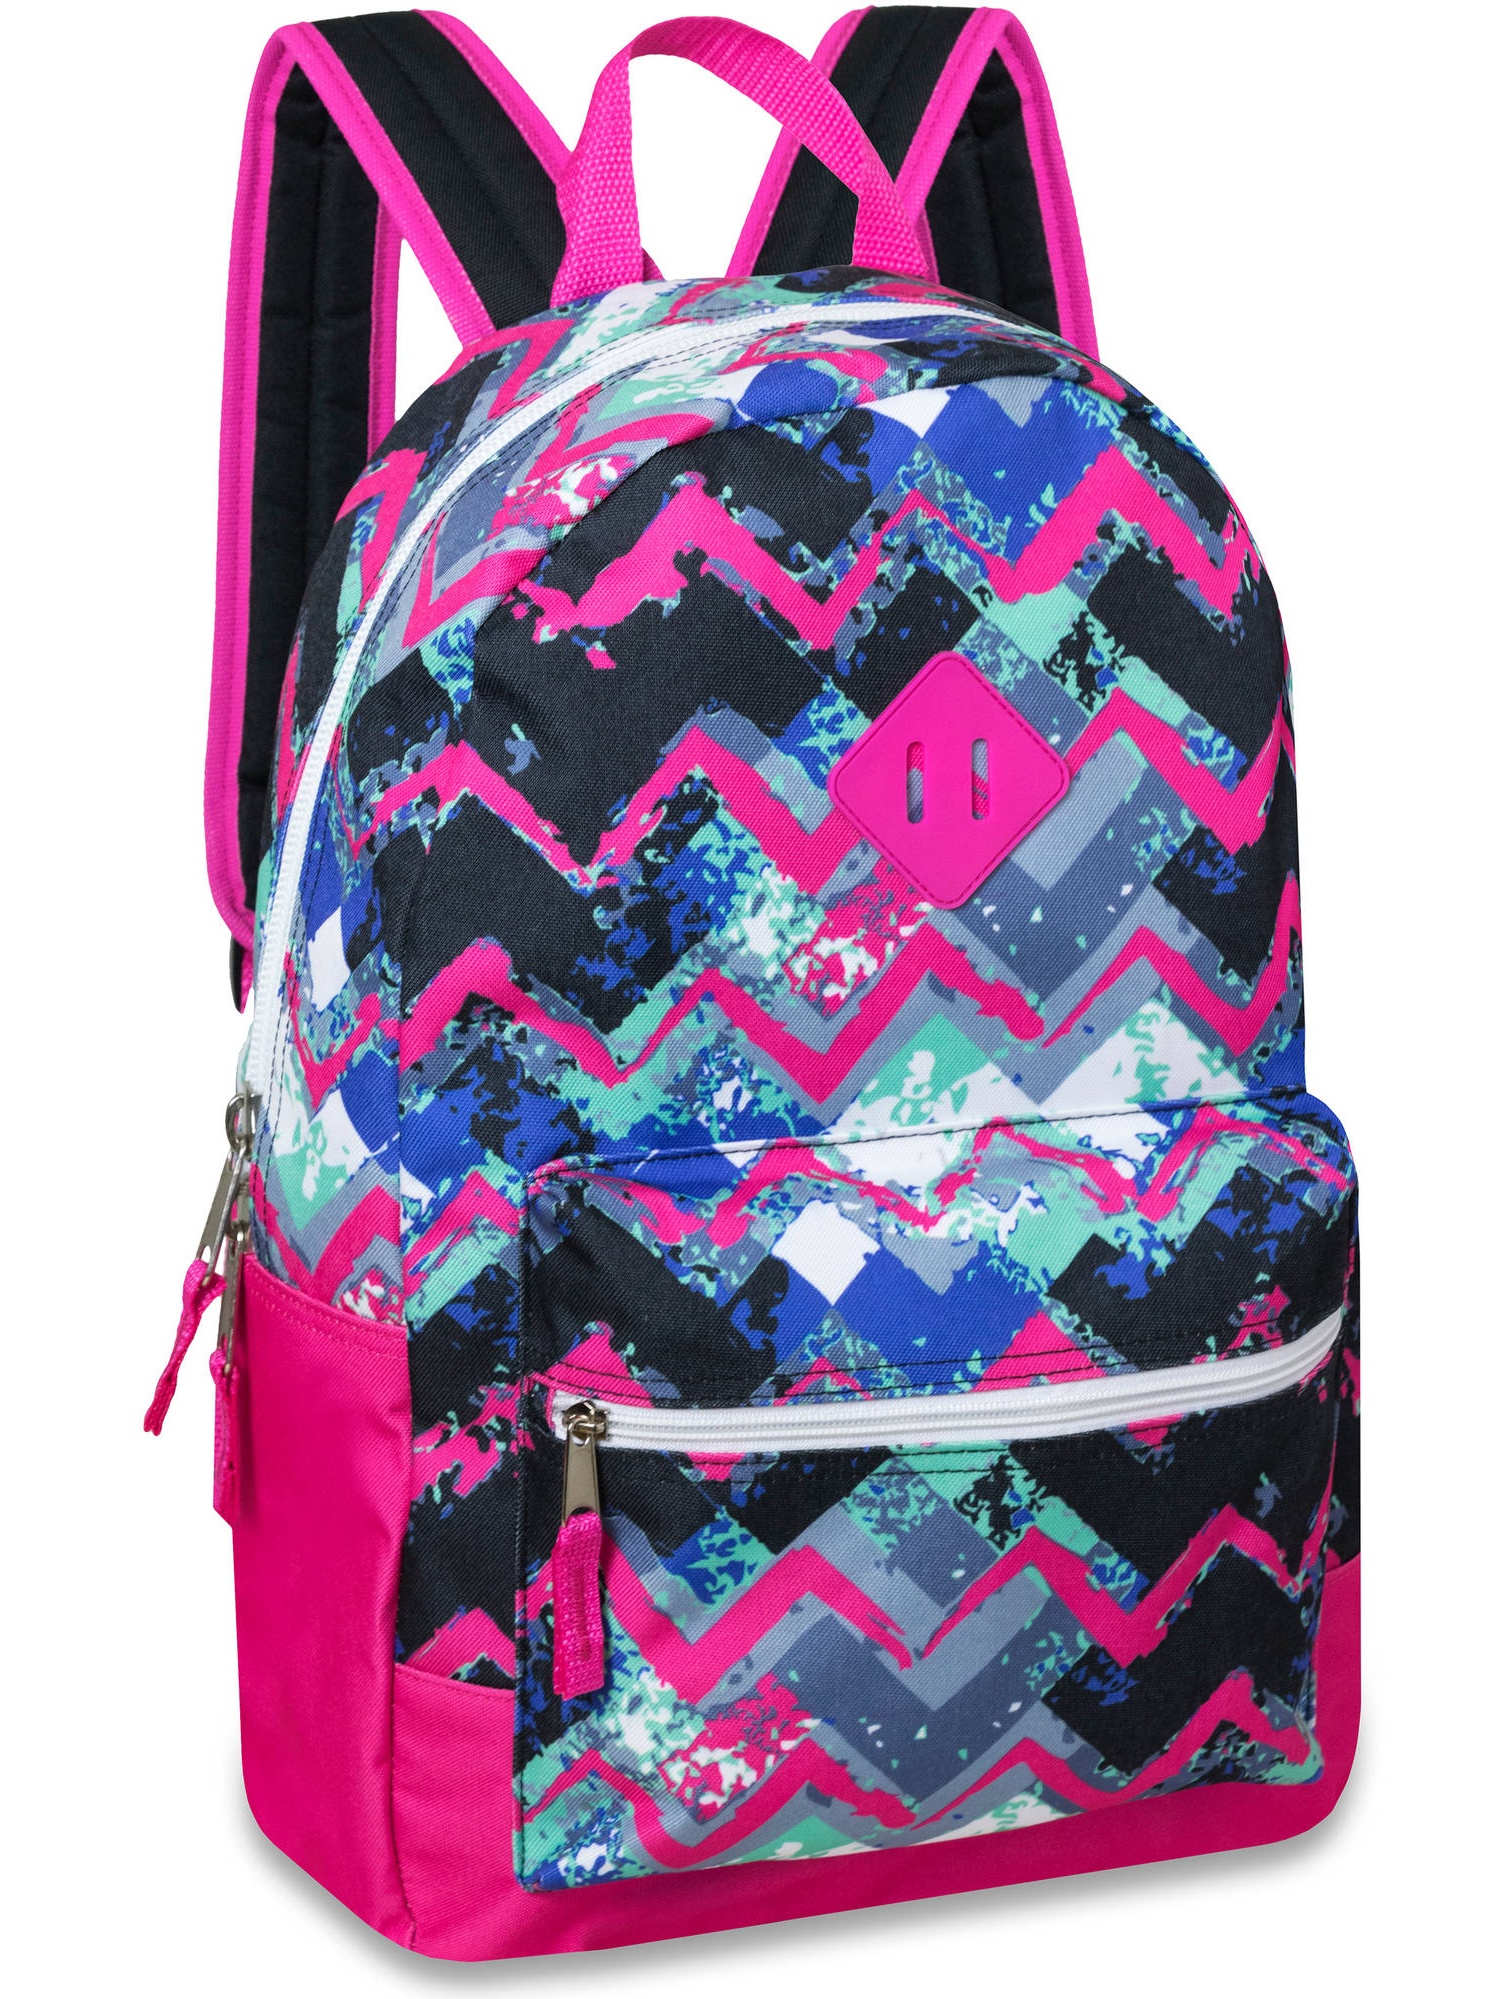 17 Inch Chevron Printed Backpack with Front Accessory Pocket - image 1 of 3